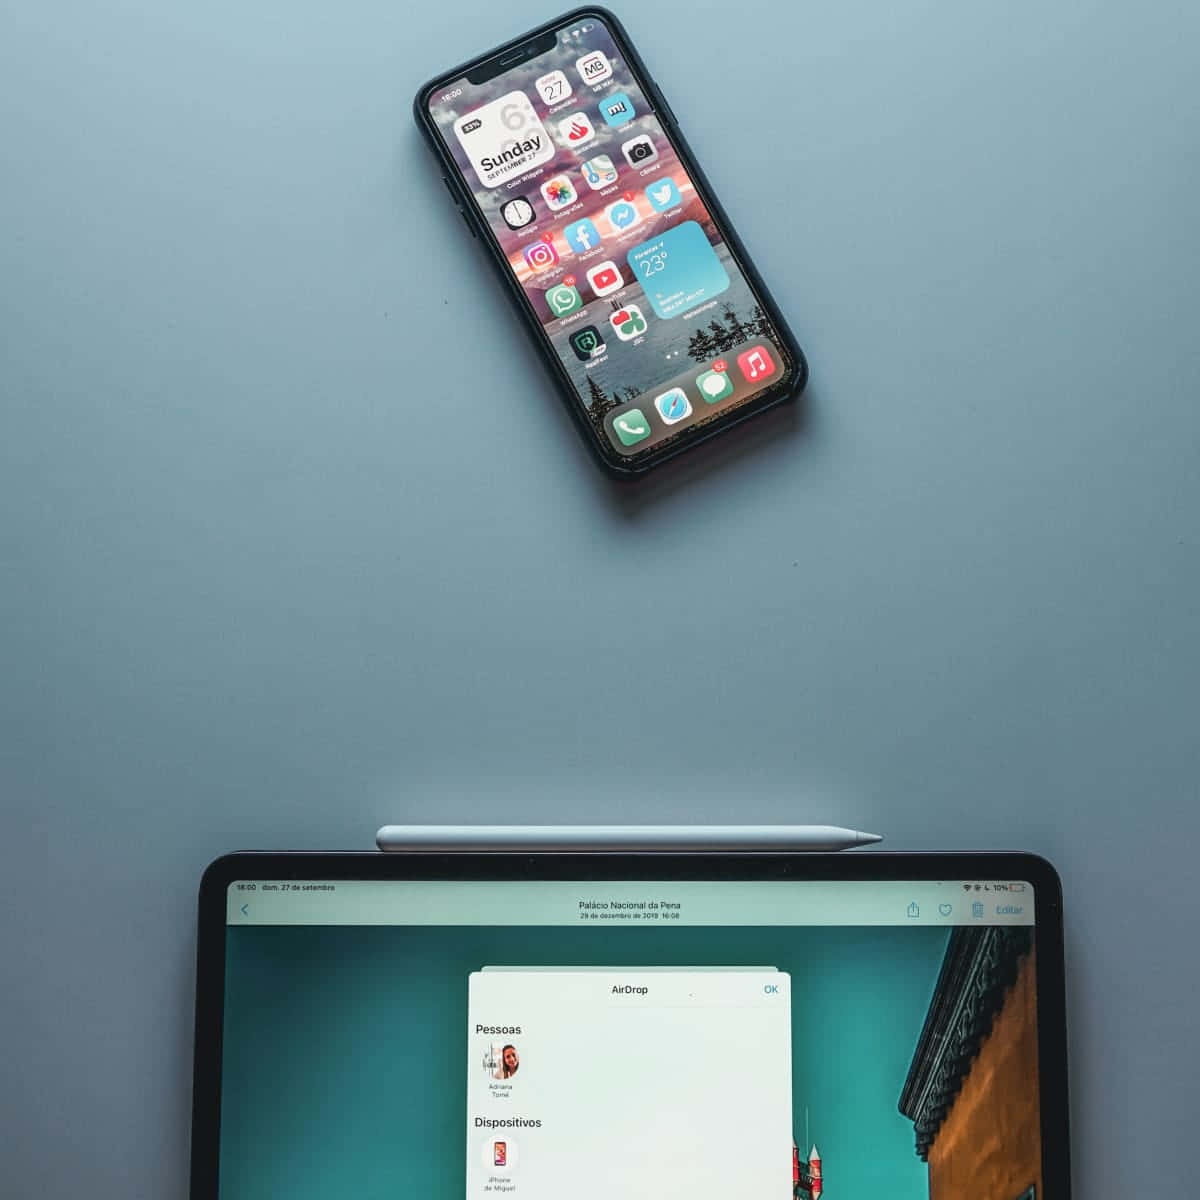 a laptop and iphone are shown next to each other